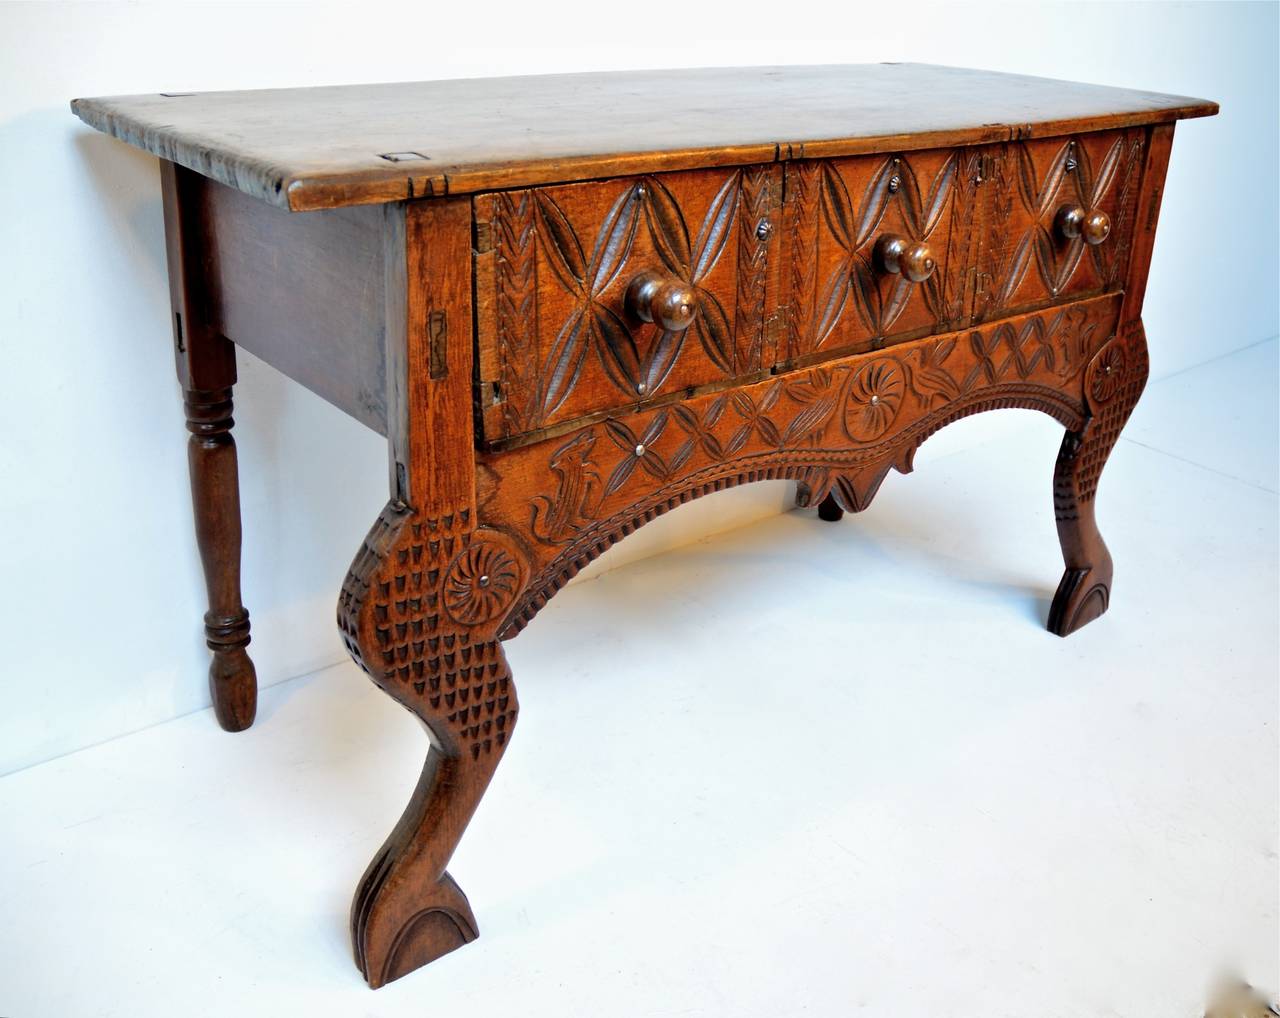 Late 19th century Central American hall table or console. This highly stylized table is most commonly referred to as a Nahuala (animal spirit) table and is specific to certain regions of Central America. The single board rectangular top rest upon